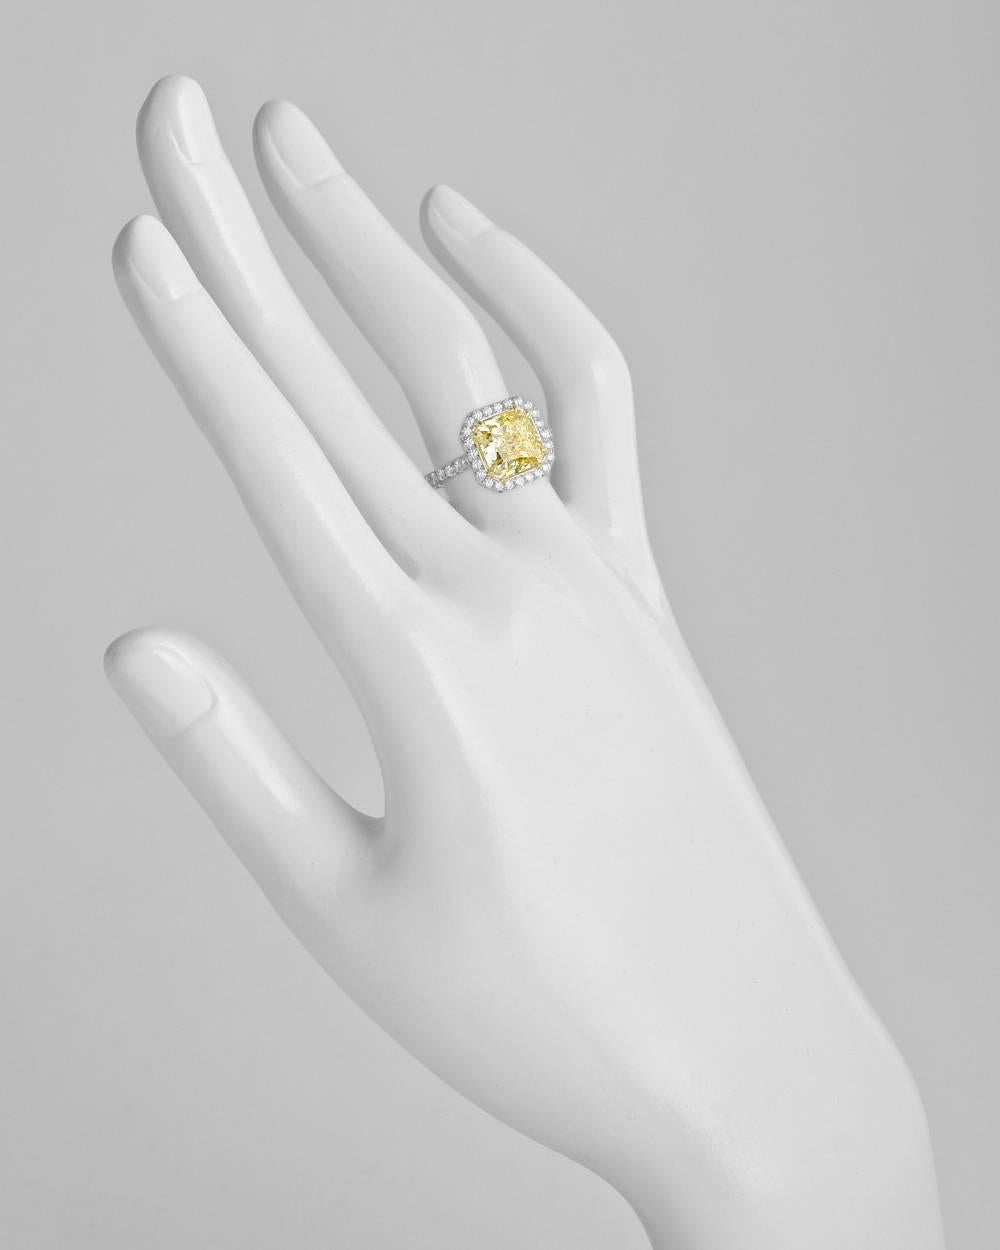 Yellow diamond engagement ring, centering a fine radiant-cut fancy yellow diamond weighing 4.01 carats with VS2-clarity, framed by round-cut white diamonds with partway round-cut white diamond-accented band, mounted in platinum and 18k yellow gold.